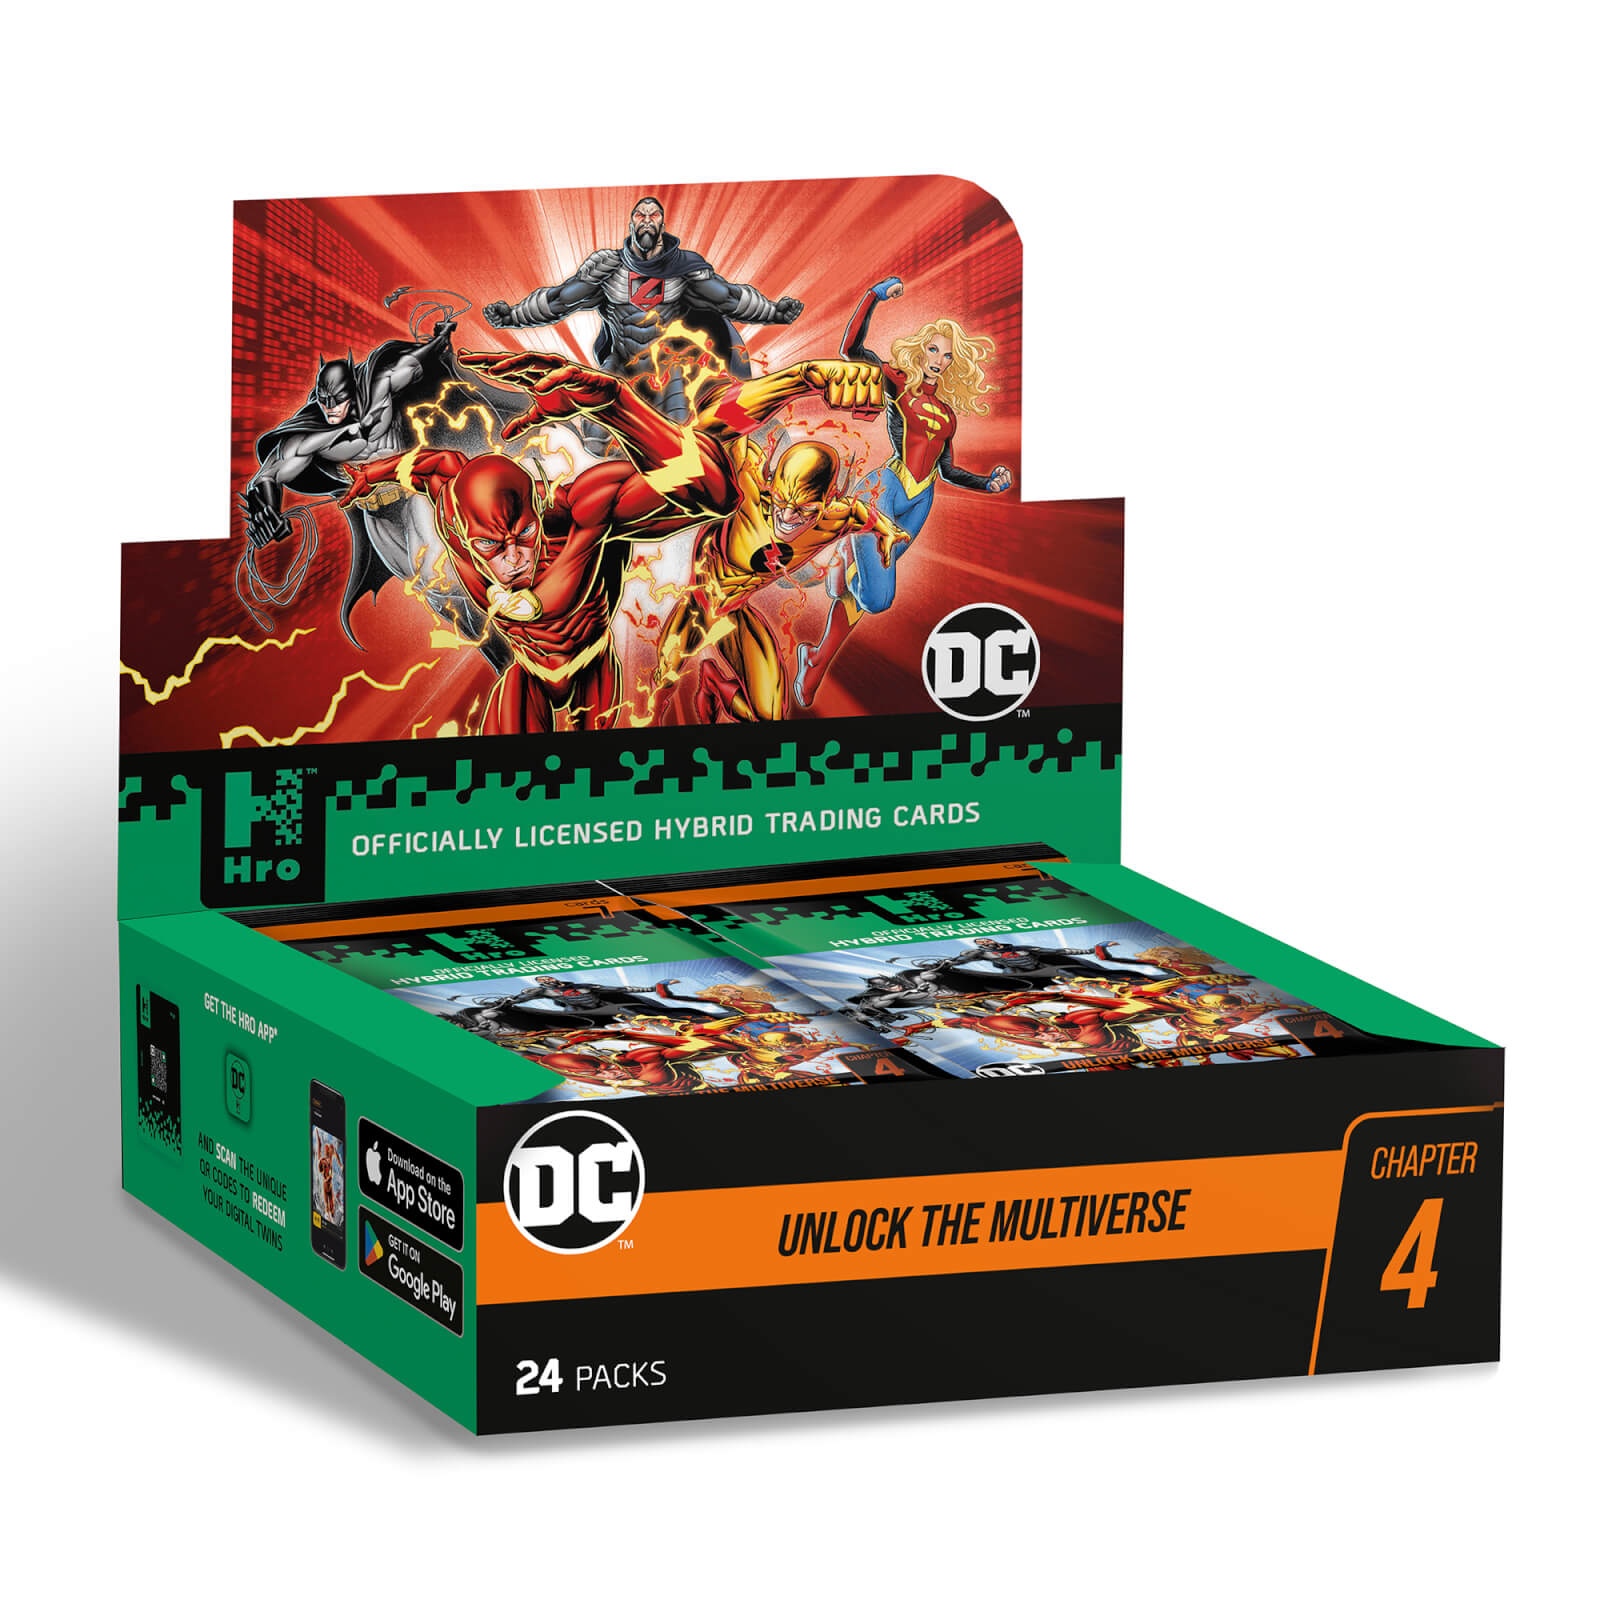 Image of DC - HRO Chapter 4 Hybrid Trading Cards Collection: 24-Pack Mega Booster Box